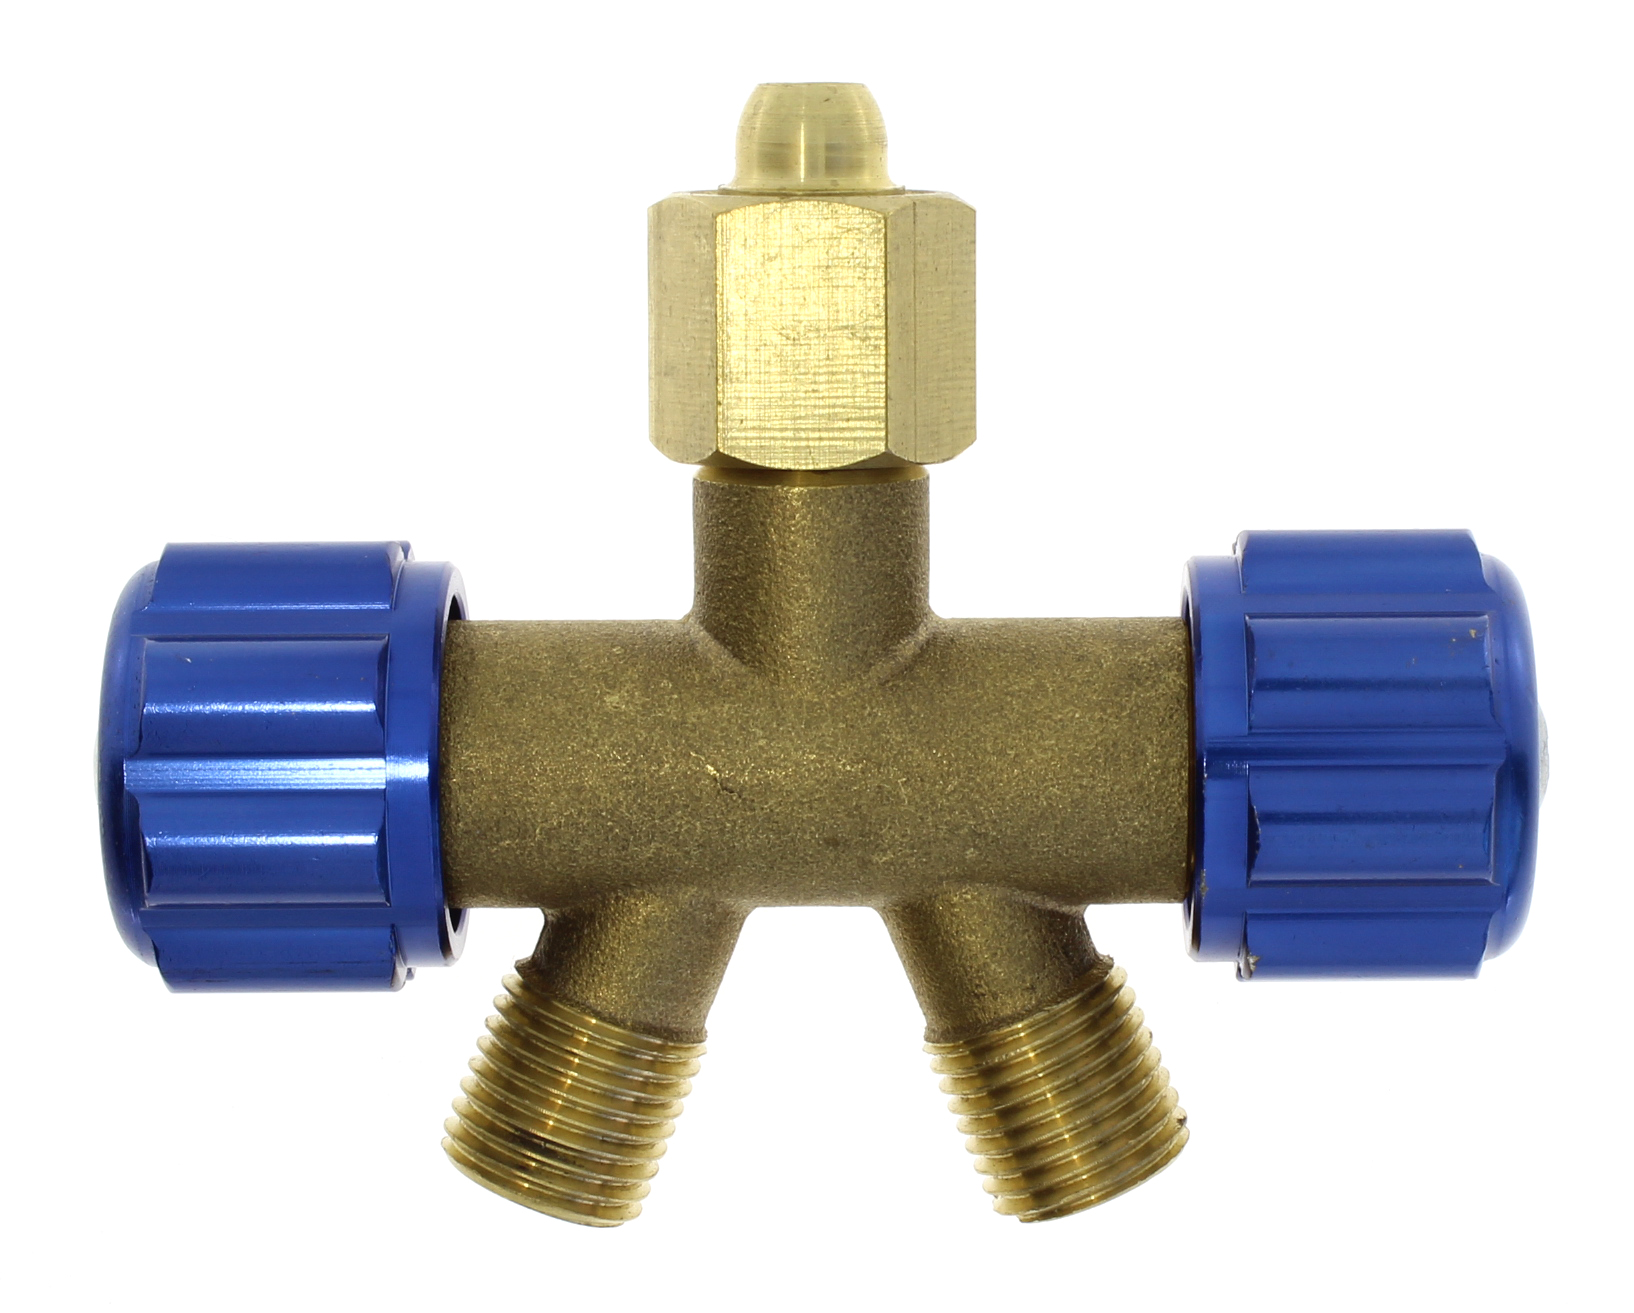 Distributor with 2 outlets 1/4" thread